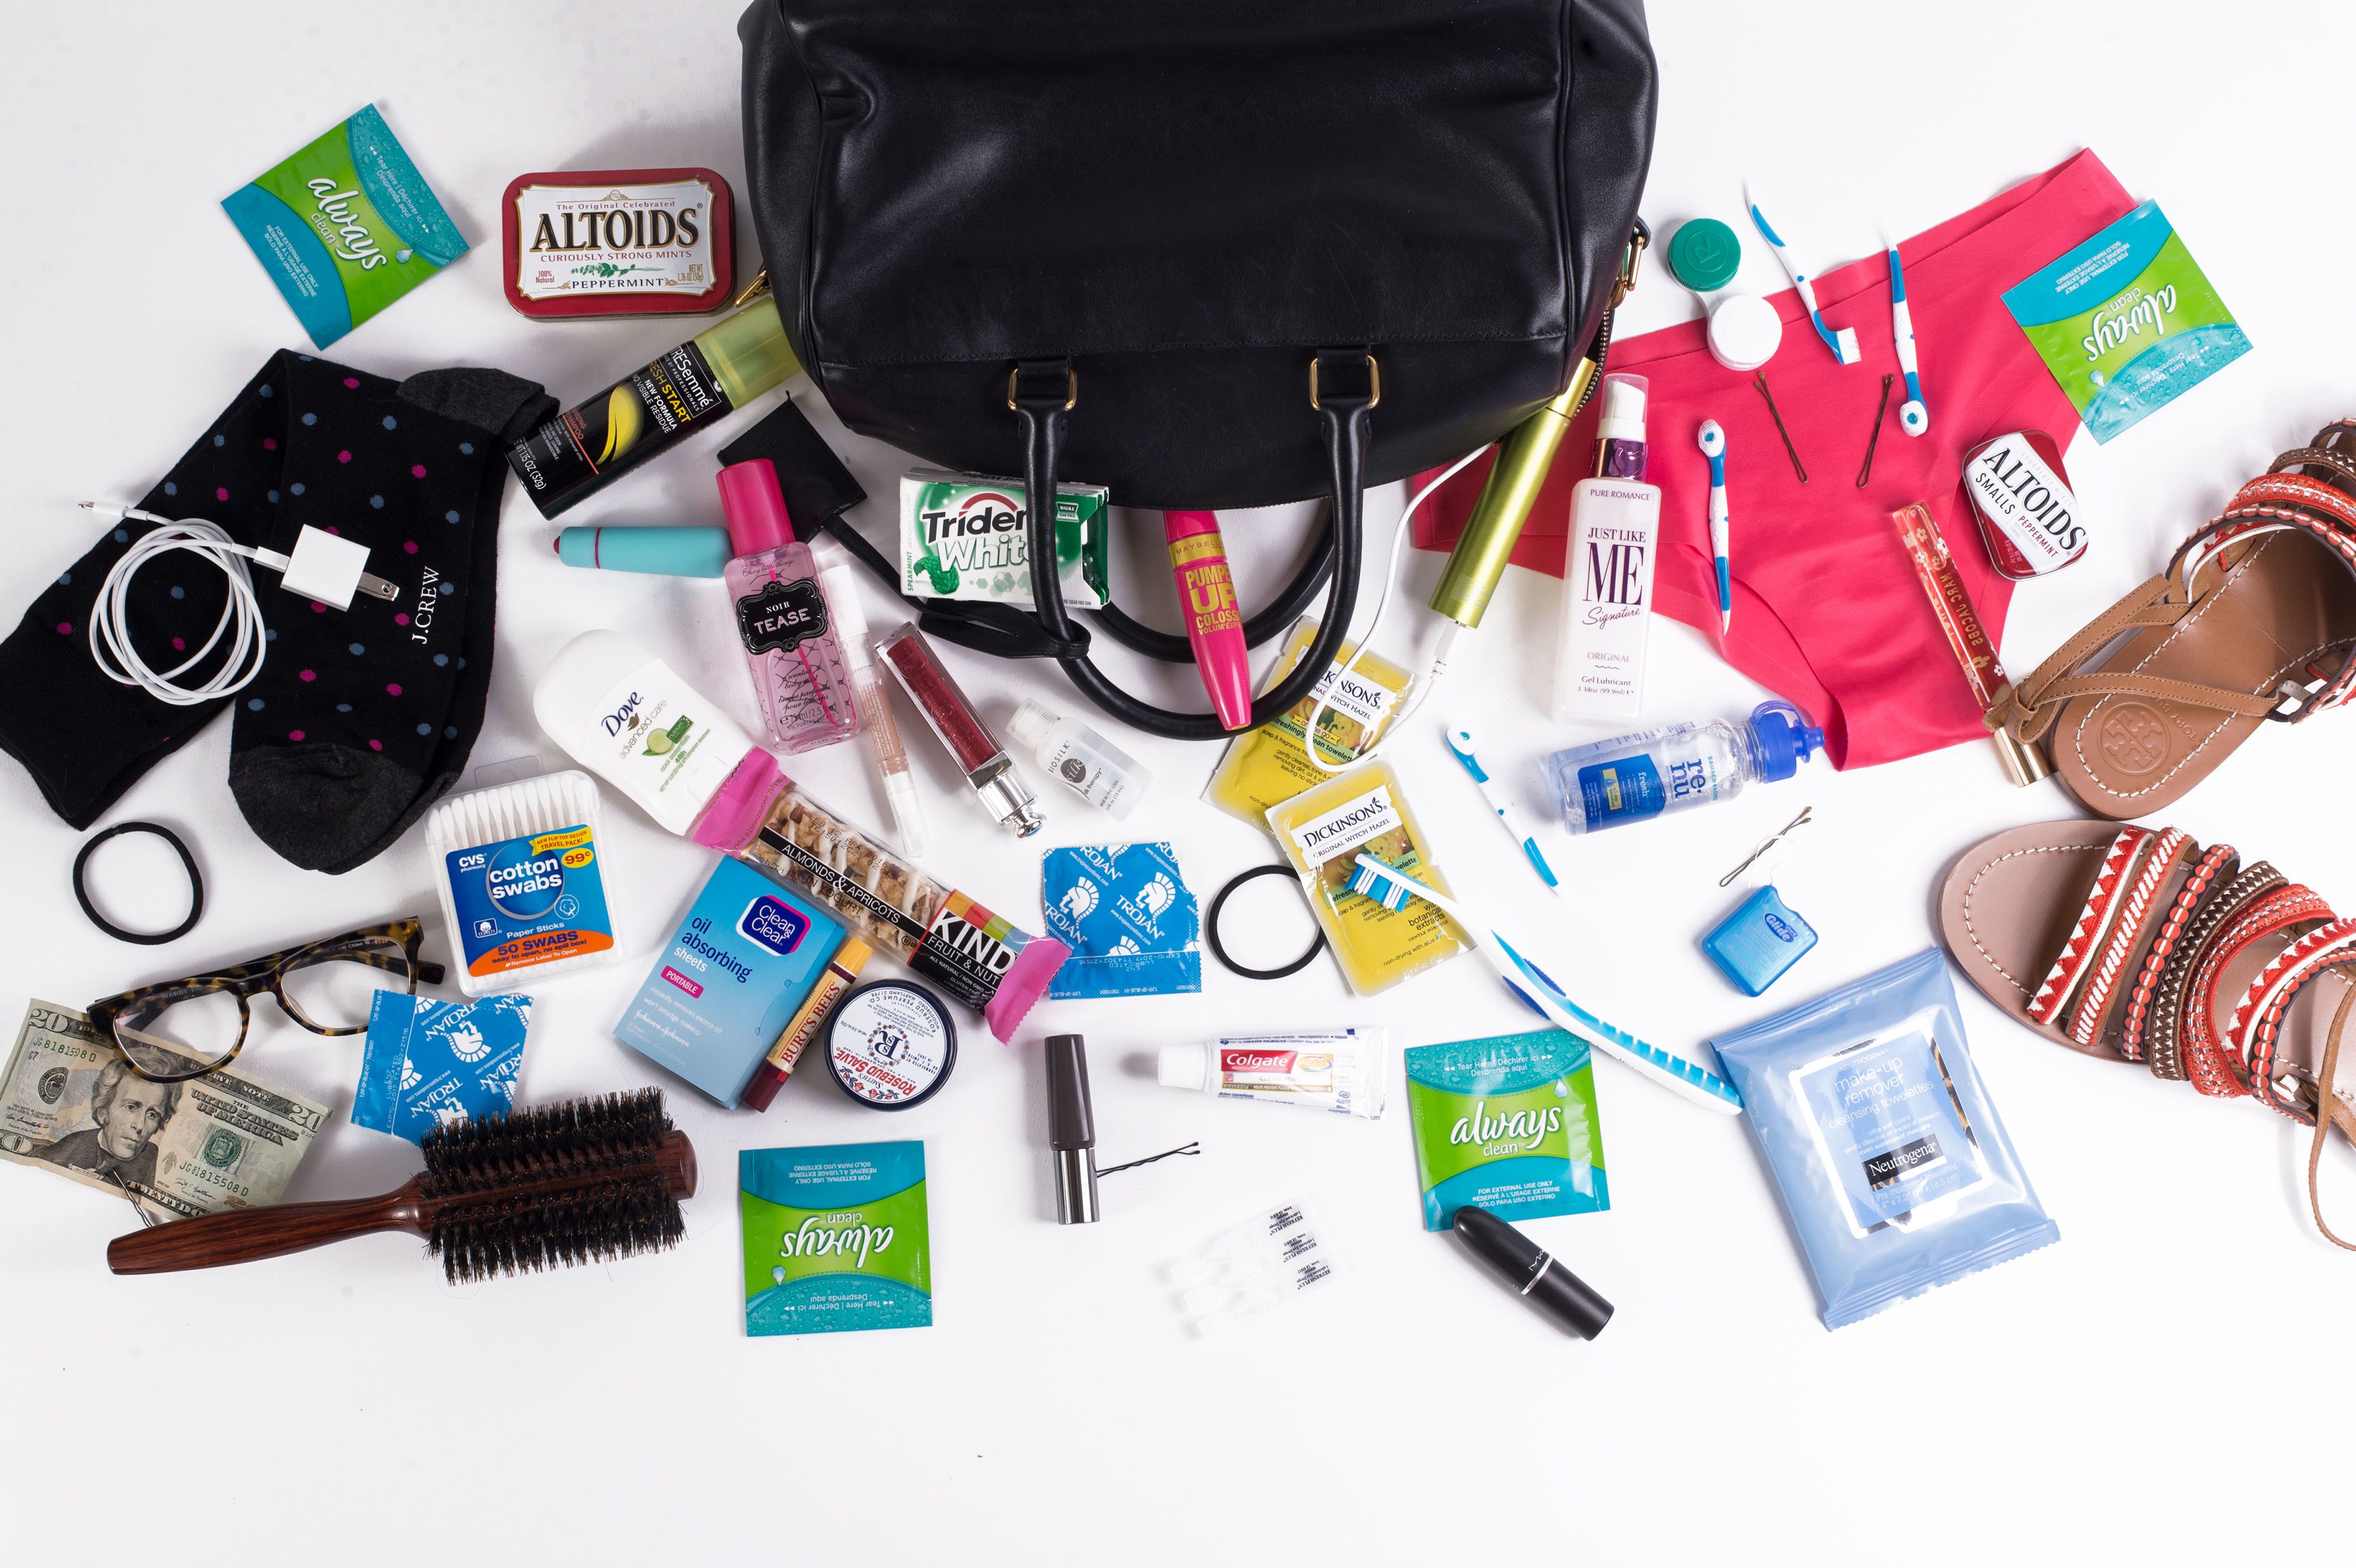 28 Things You Should Always Pack in Your Carry-on Bag